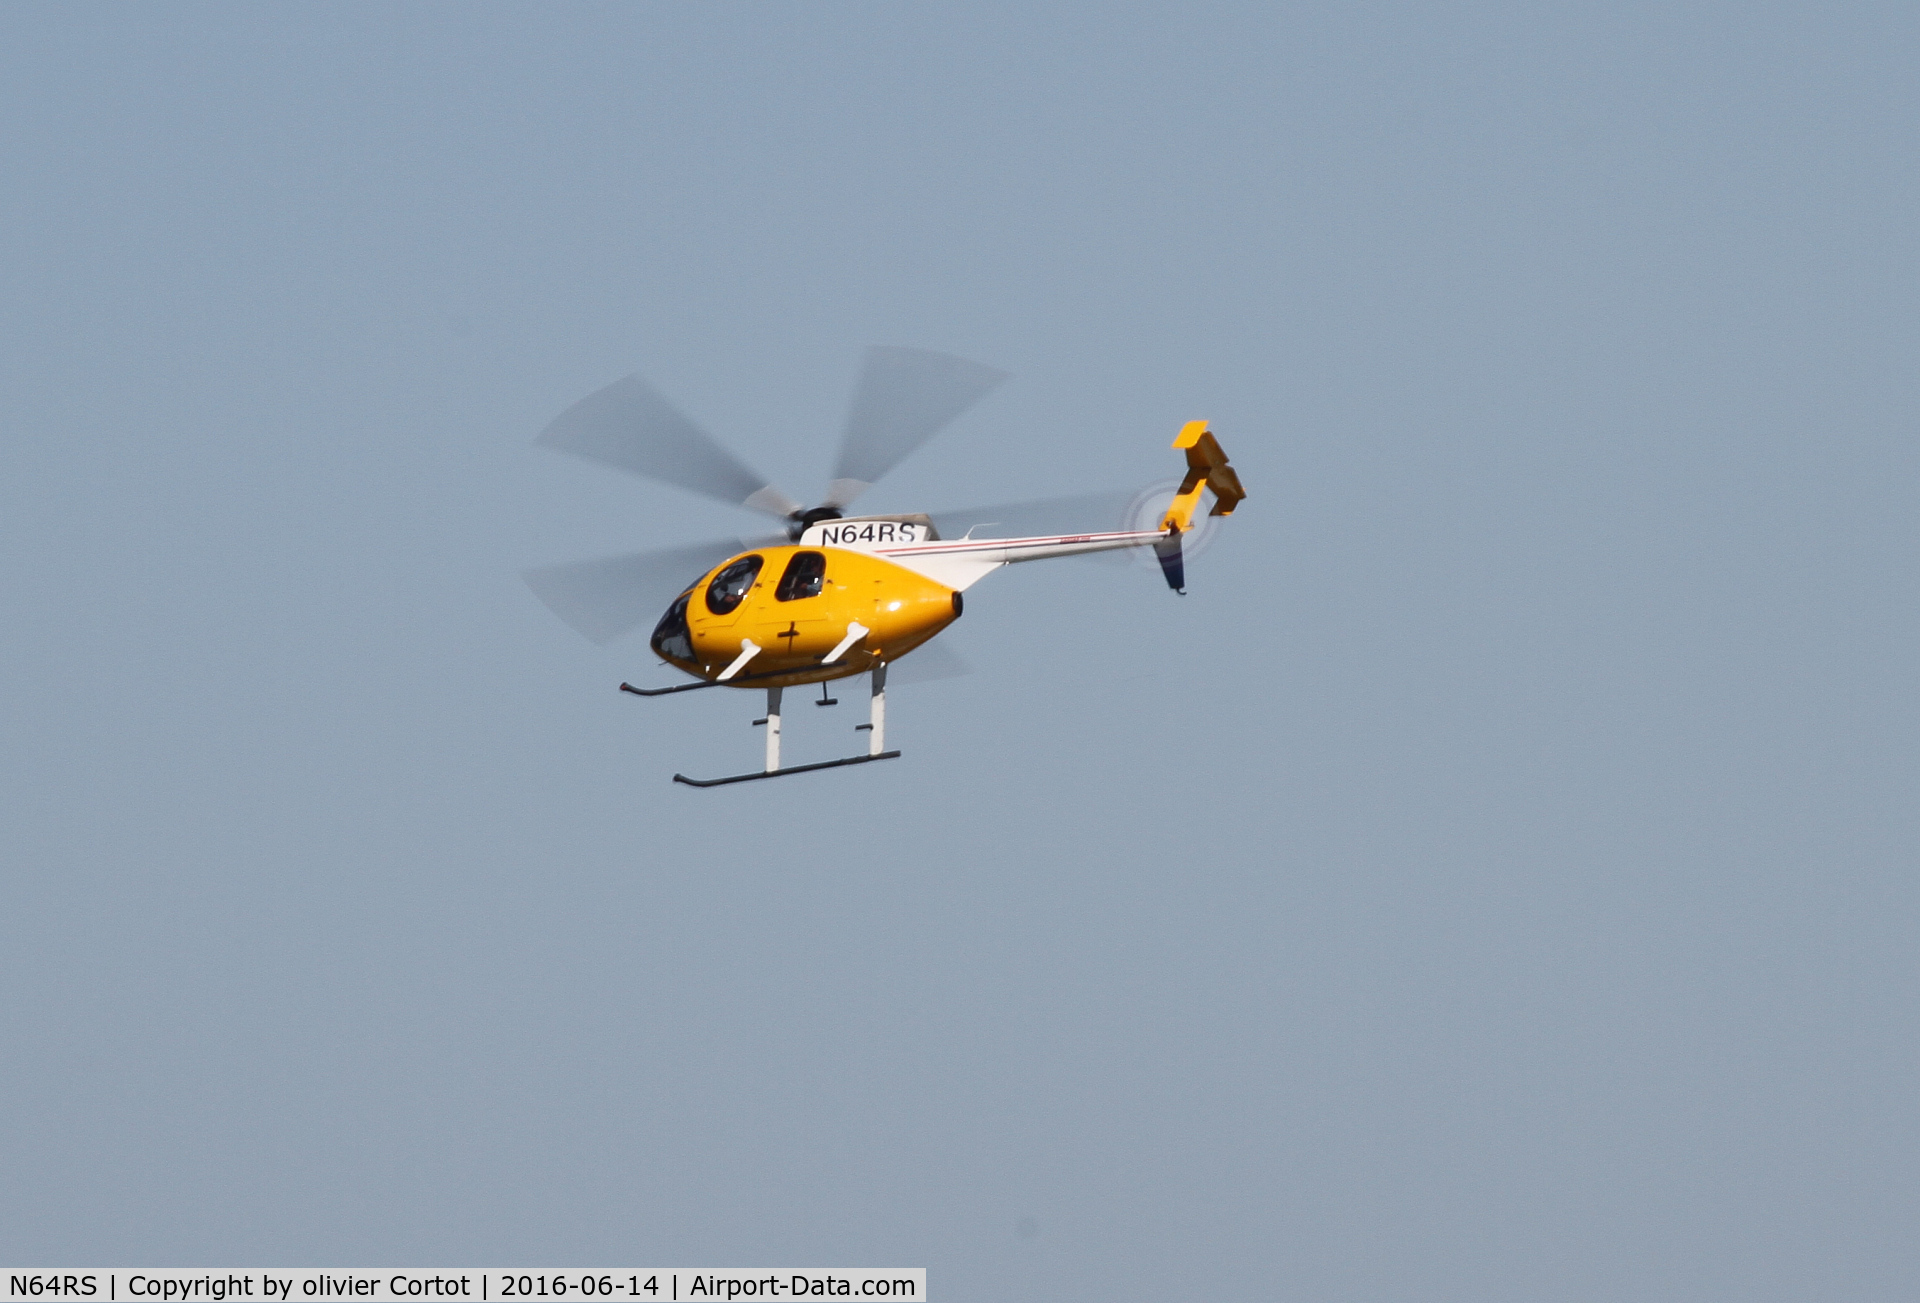 N64RS, 1989 MD Helicopters 369E C/N 0320E, taken from the canadian side, june 2016